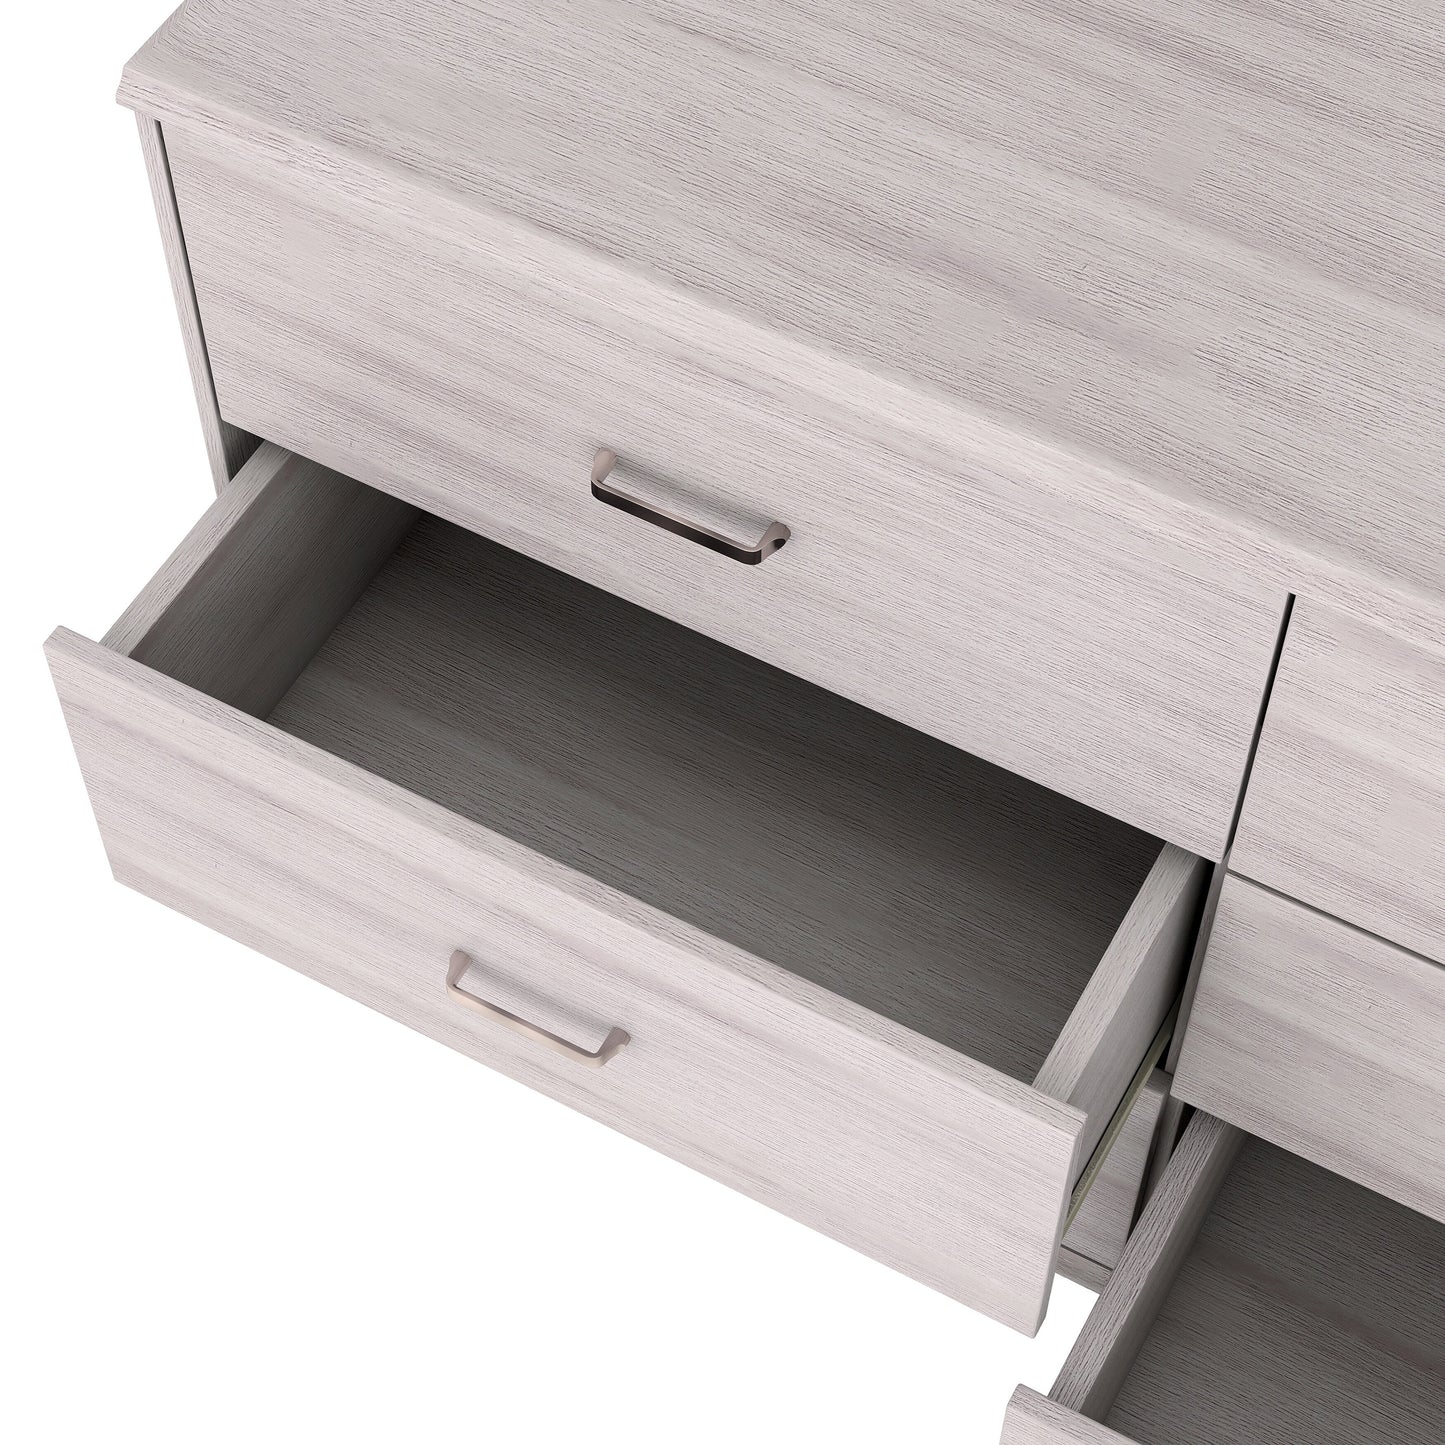 Left angled bird's eye close-up drawer view of a contemporary white oak six-drawer double dresser on a white background